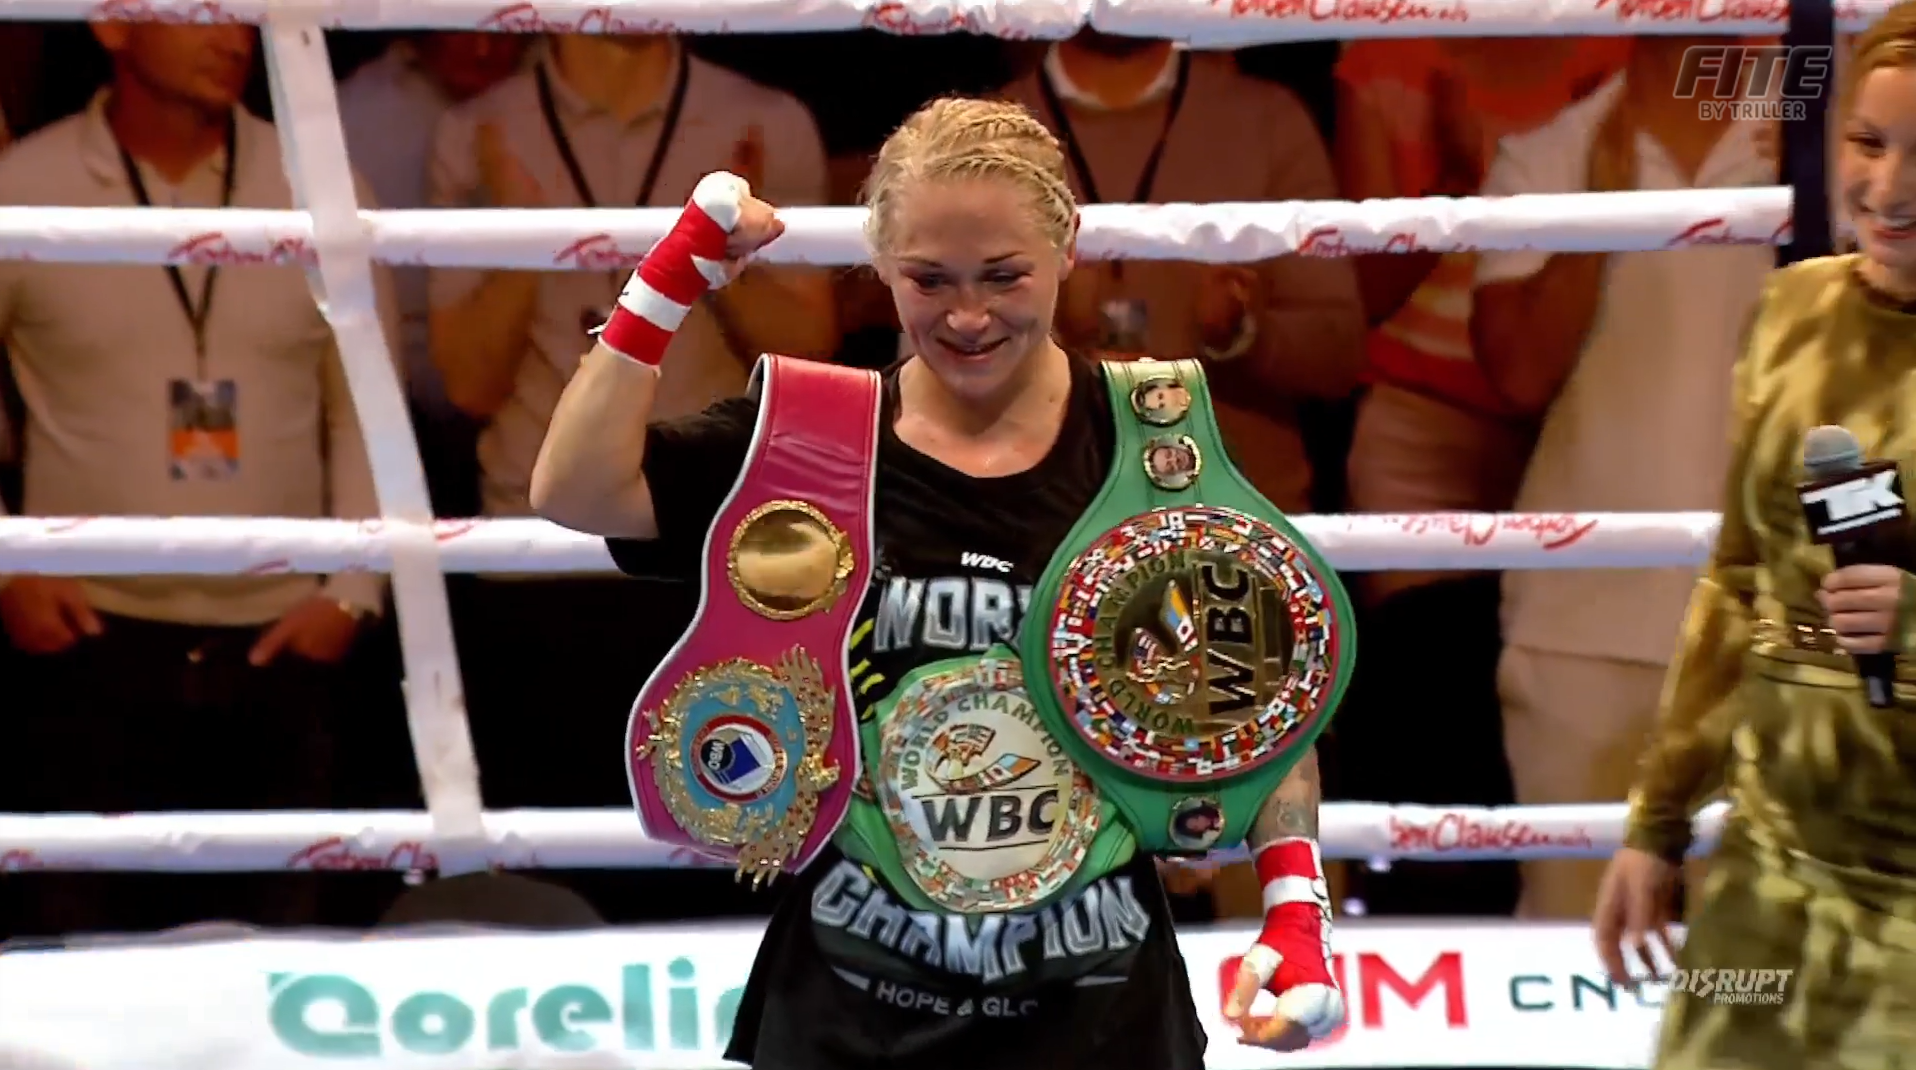 Dina Thorslund unified two bantamweight titles with a win over Yuliahn Luna